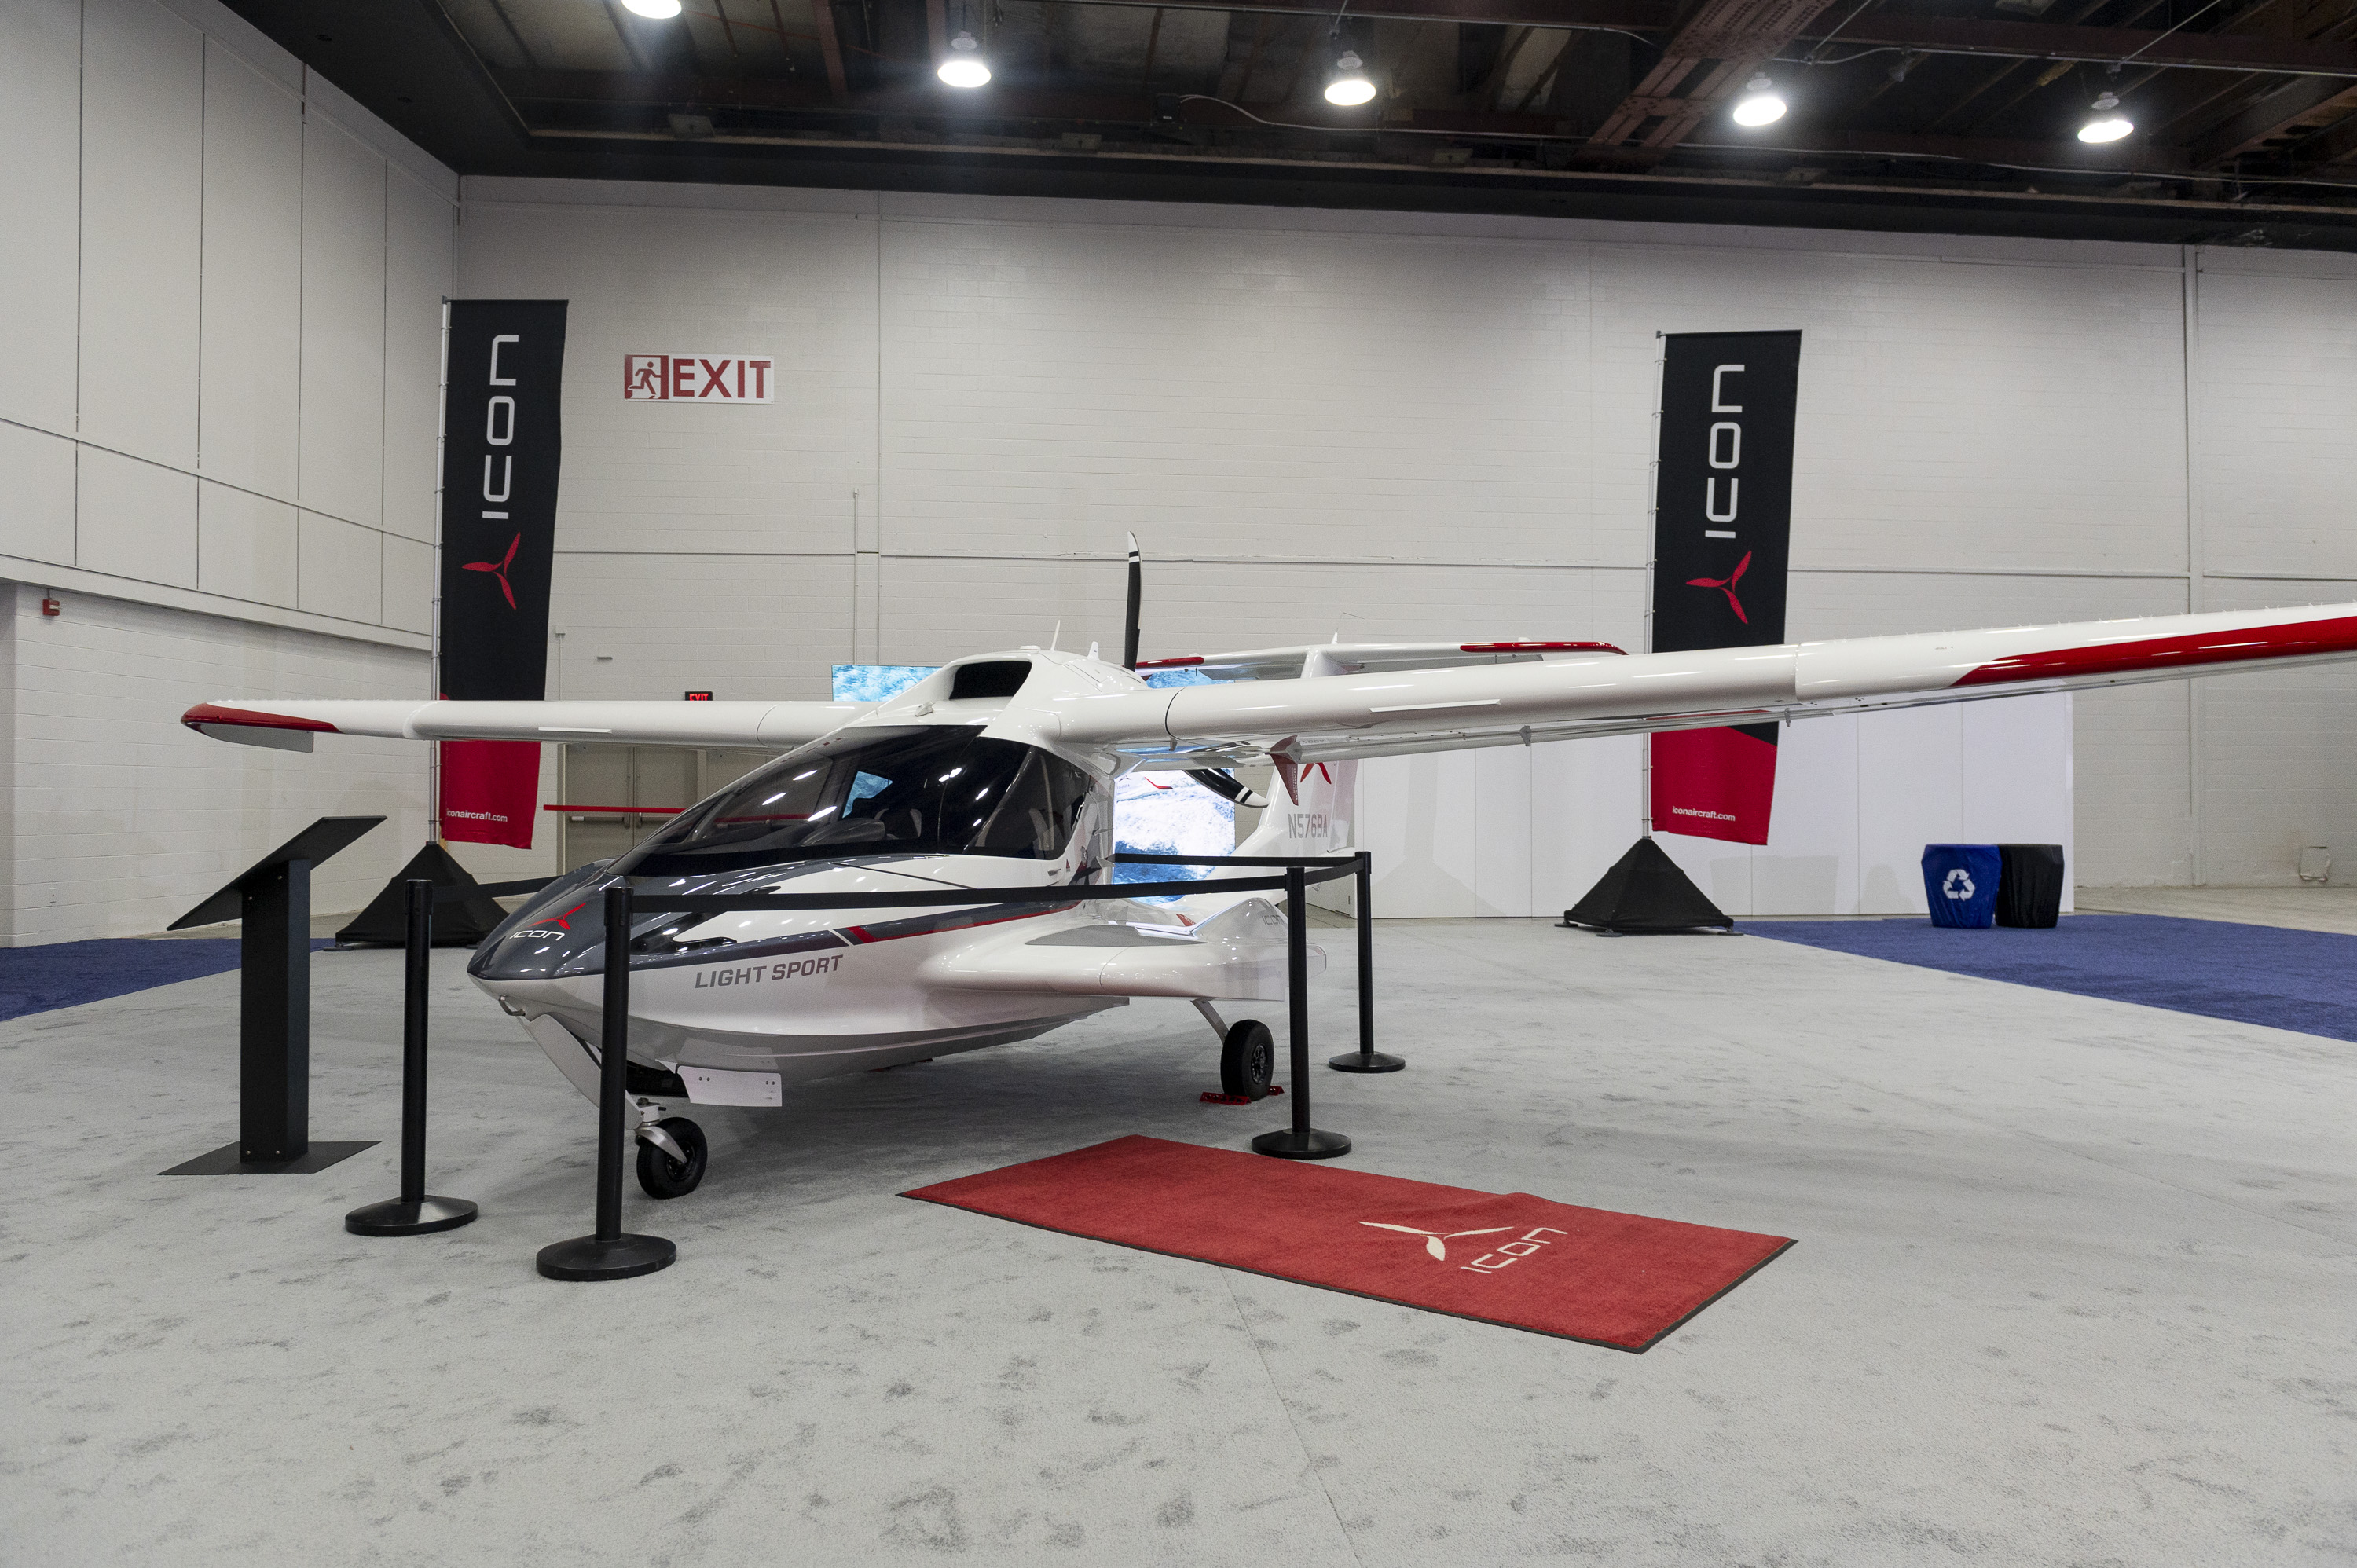 An ICON A5 light sport aircraft on display as the 2022 North American International Auto Show begins with media preview day at Huntington Place in Detroit on Wednesday, Sept. 14 2022.